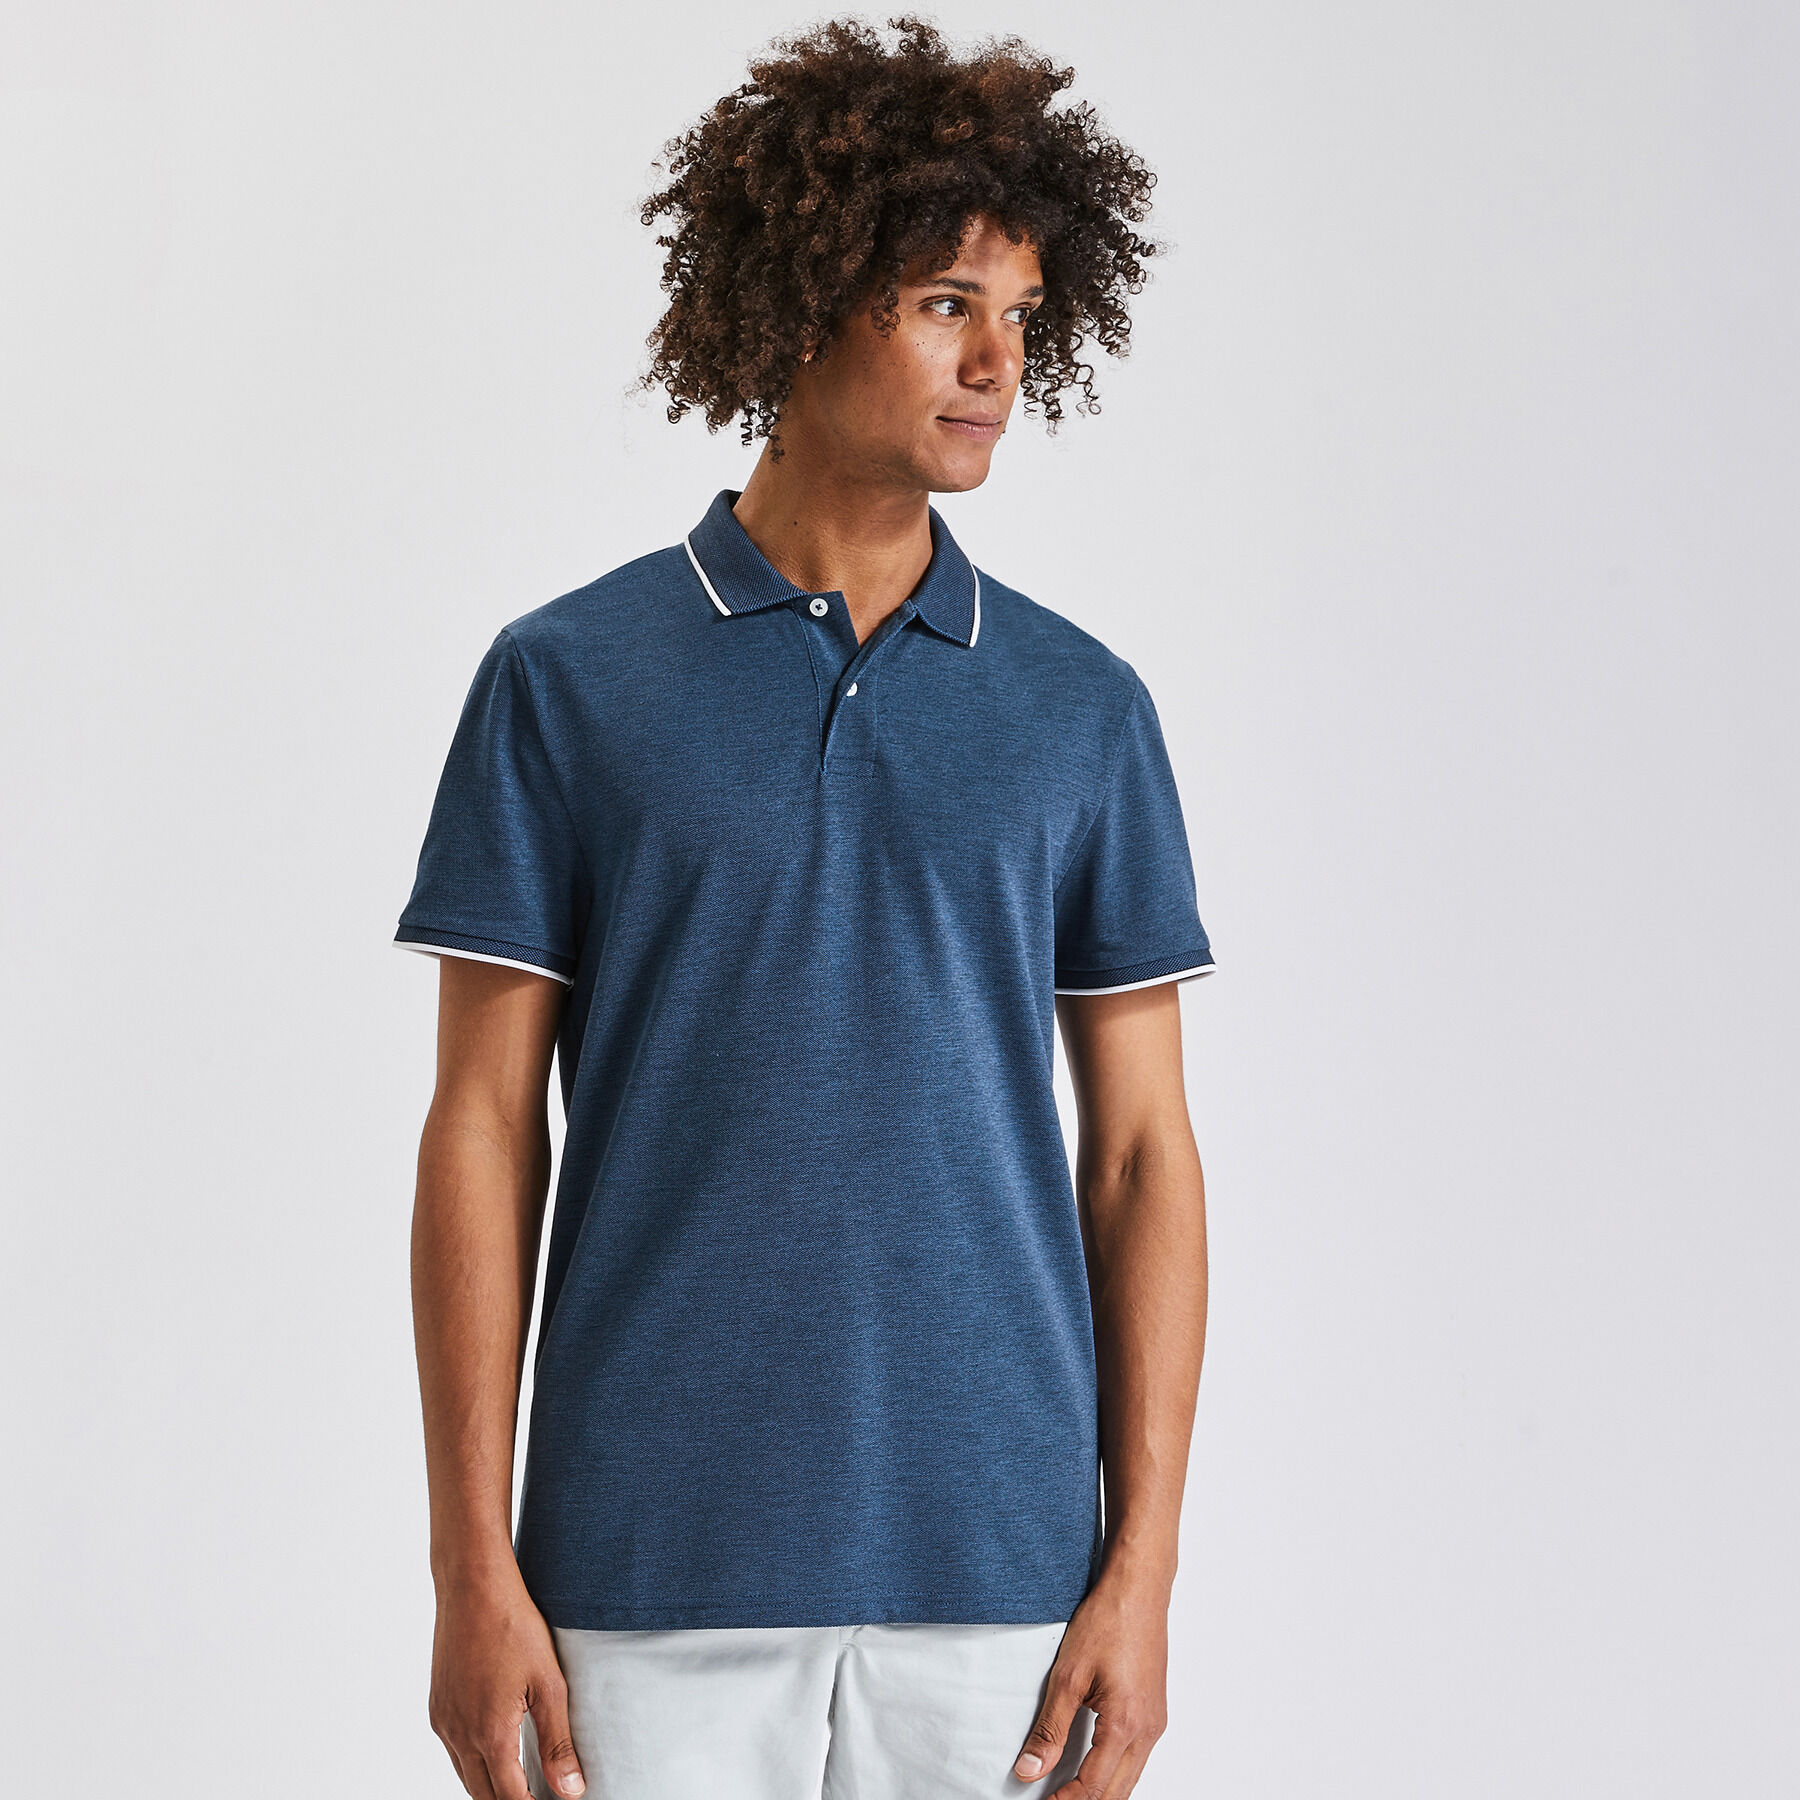 Homme Vêtements Jules Homme Tee-shirts & Polos Jules Homme Polos Jules Homme Polos Jules Homme bleu S Polo JULES 1 